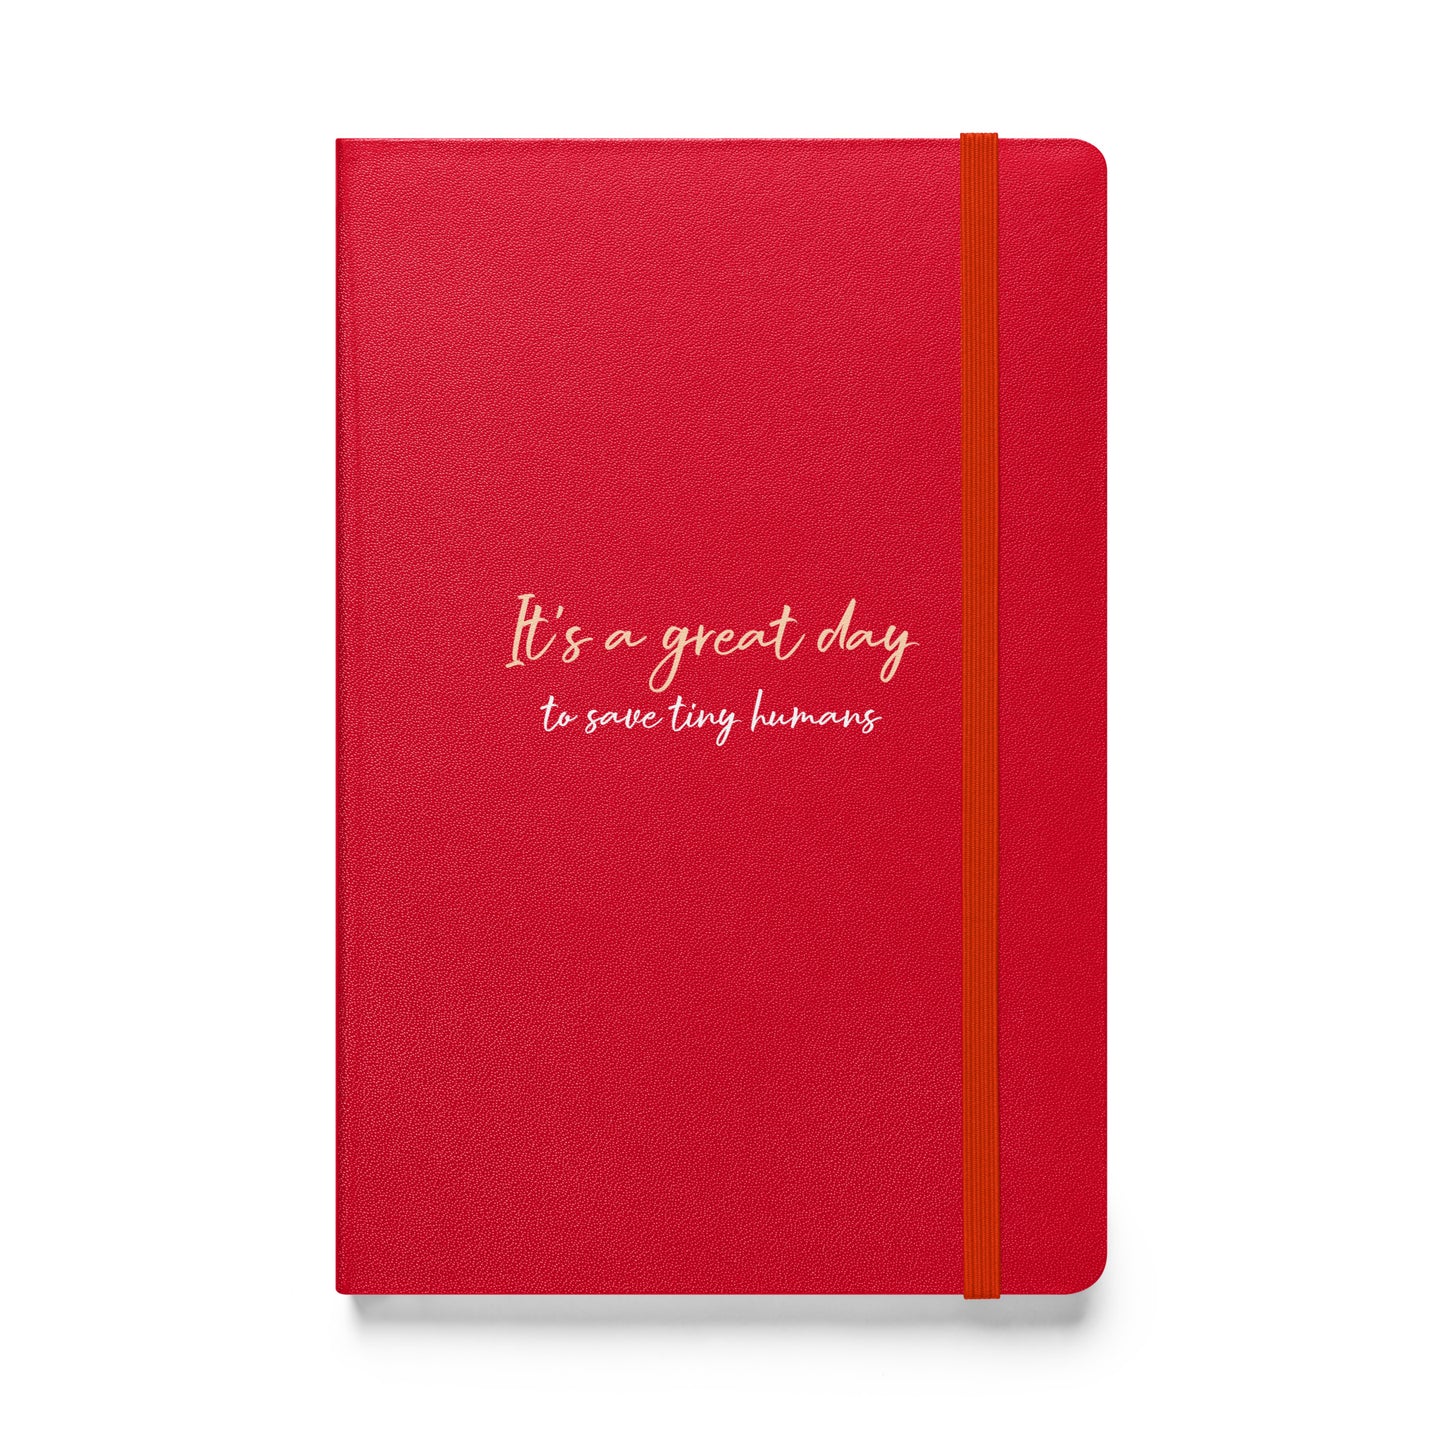 "it's a great day" notebook